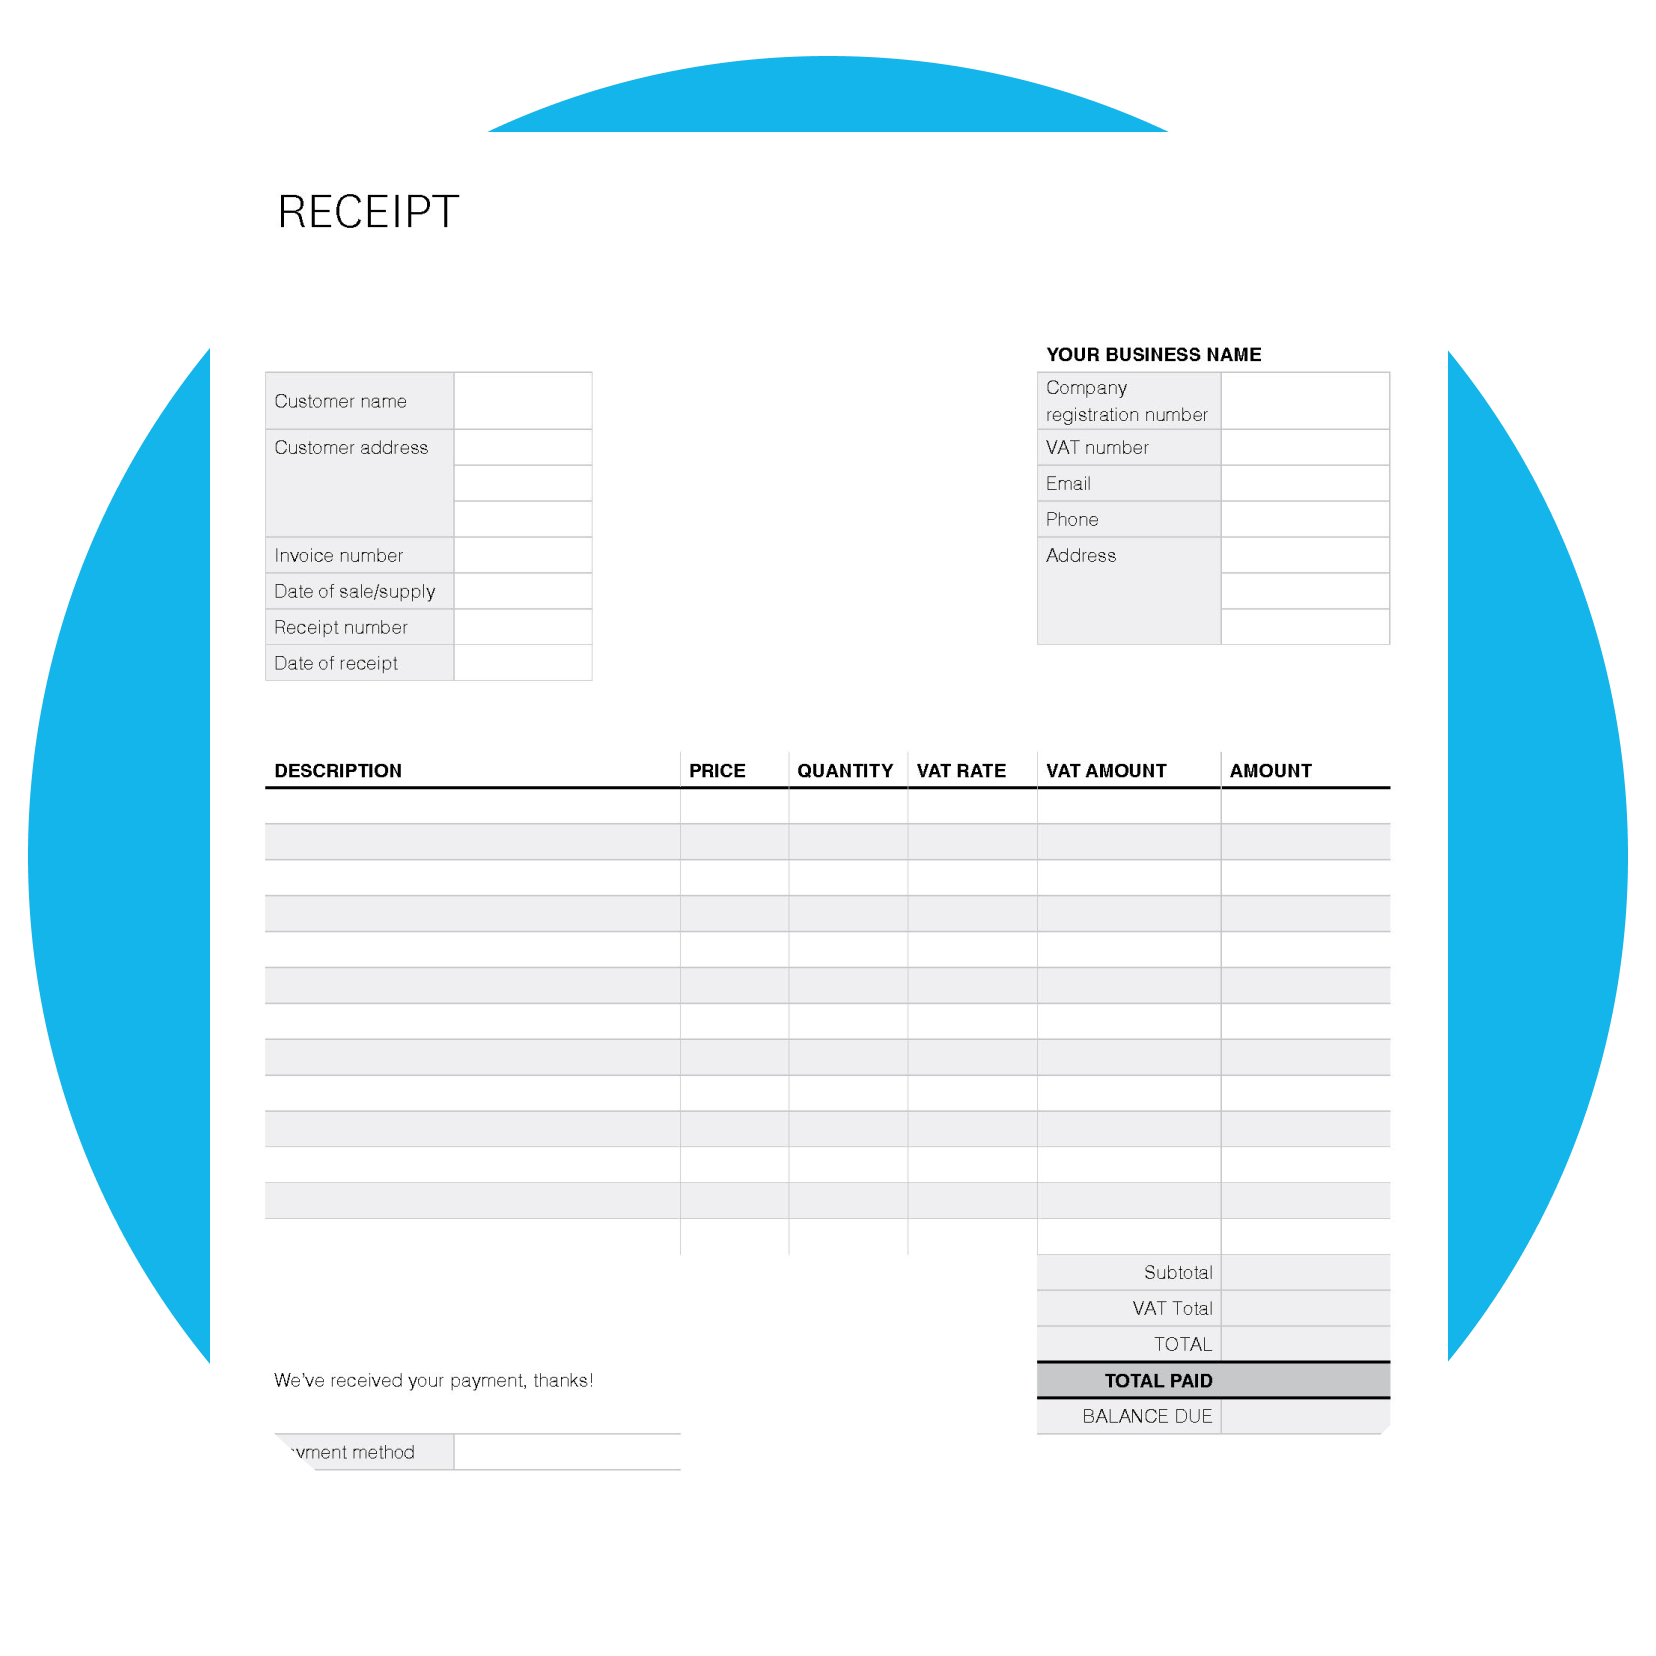 Receipt template with blank fields for users to fill out.